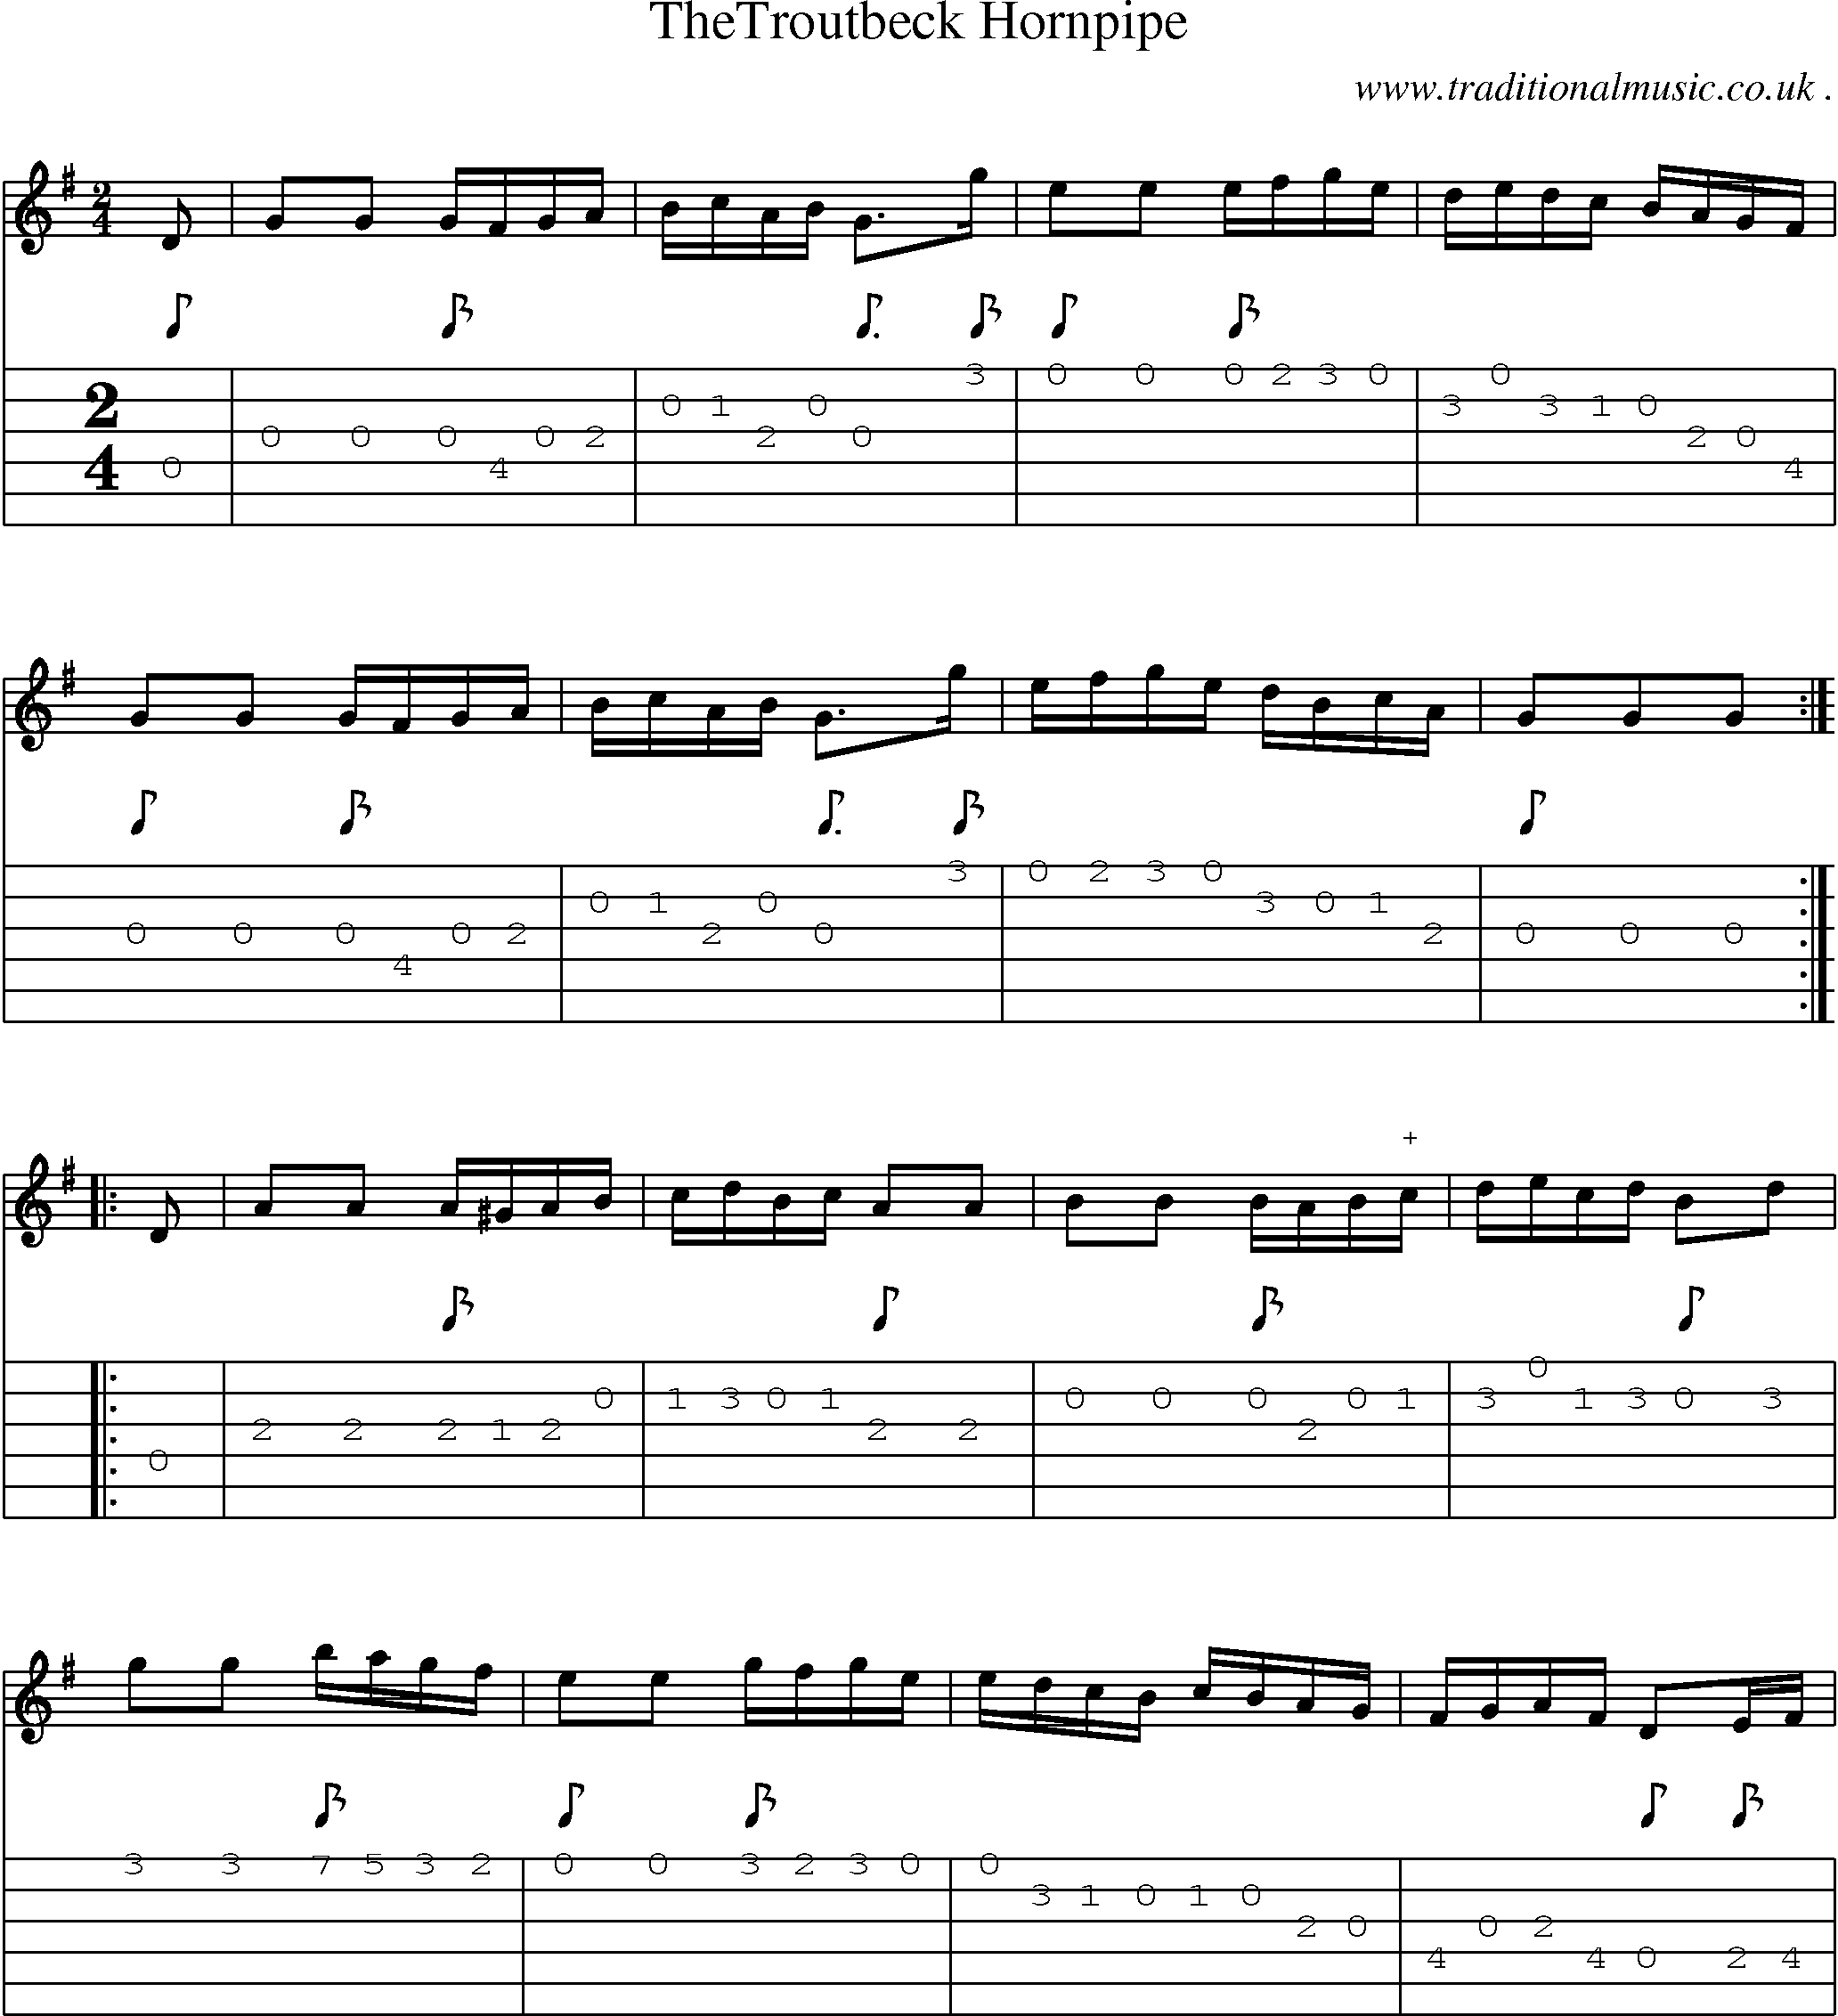 Sheet-Music and Guitar Tabs for Thetroutbeck Hornpipe